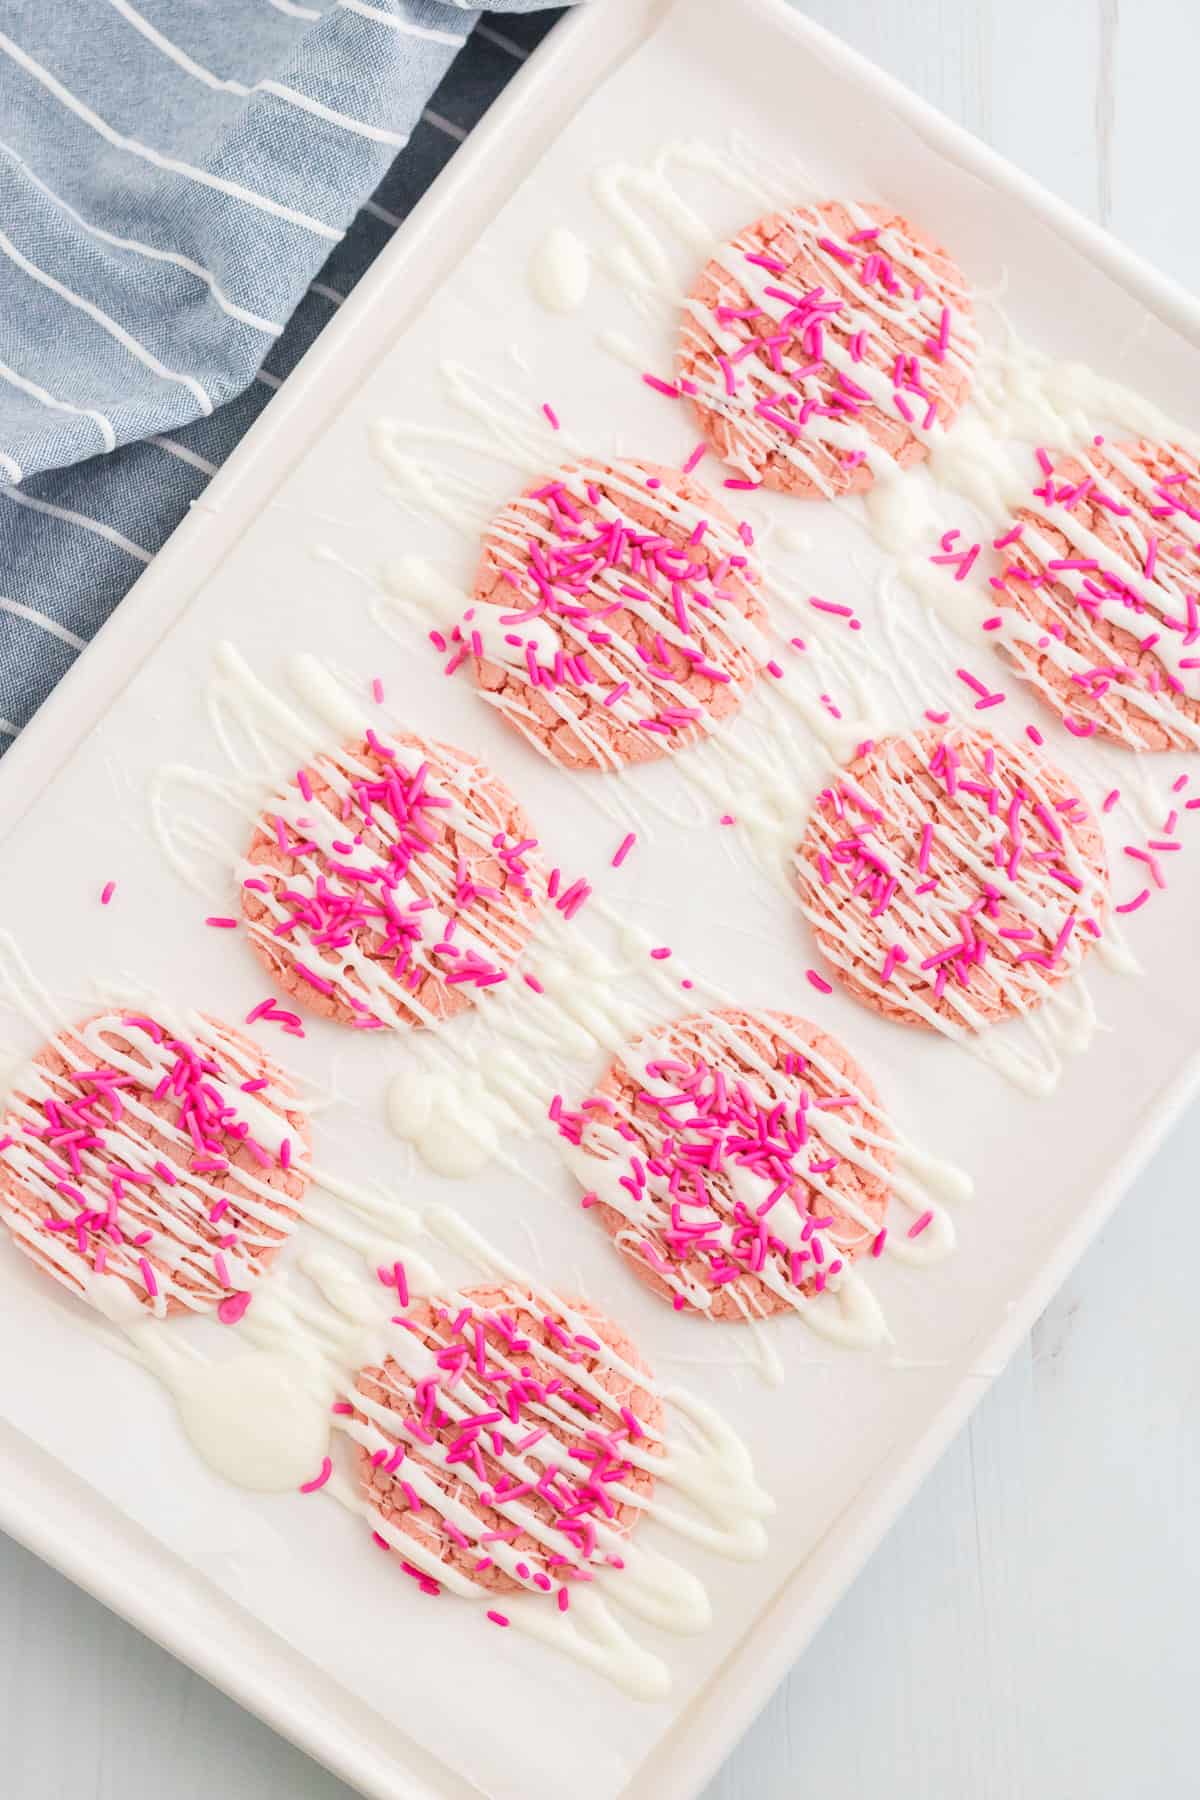 strawberry cake mix cookies on a sheet pan.